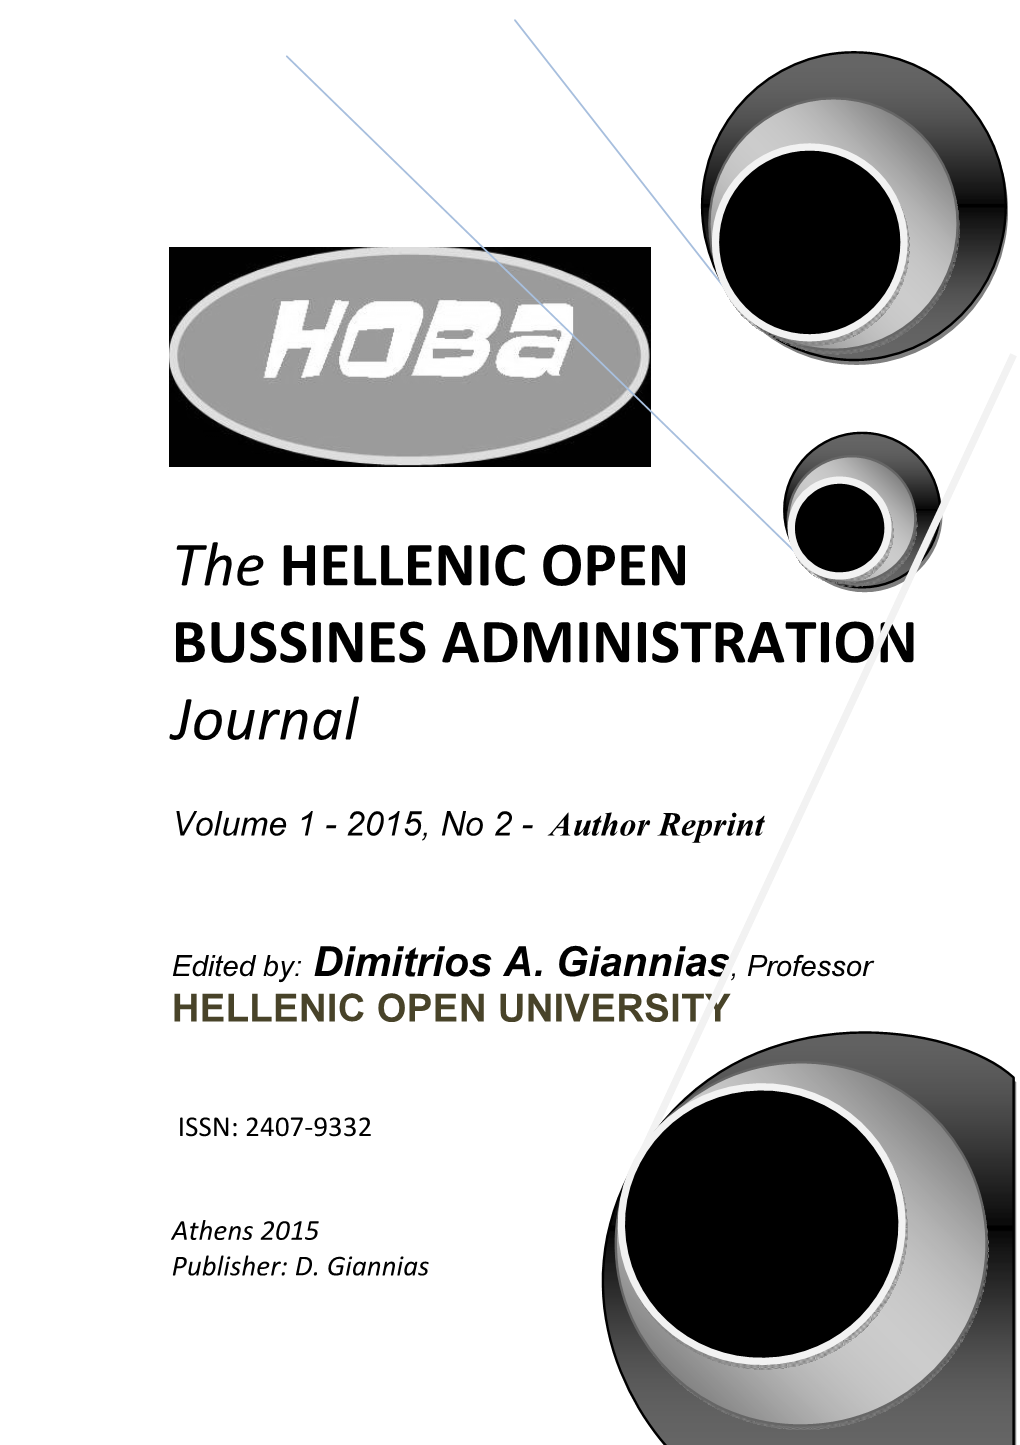 The HELLENIC OPEN BUSSINES ADMINISTRATION Journal